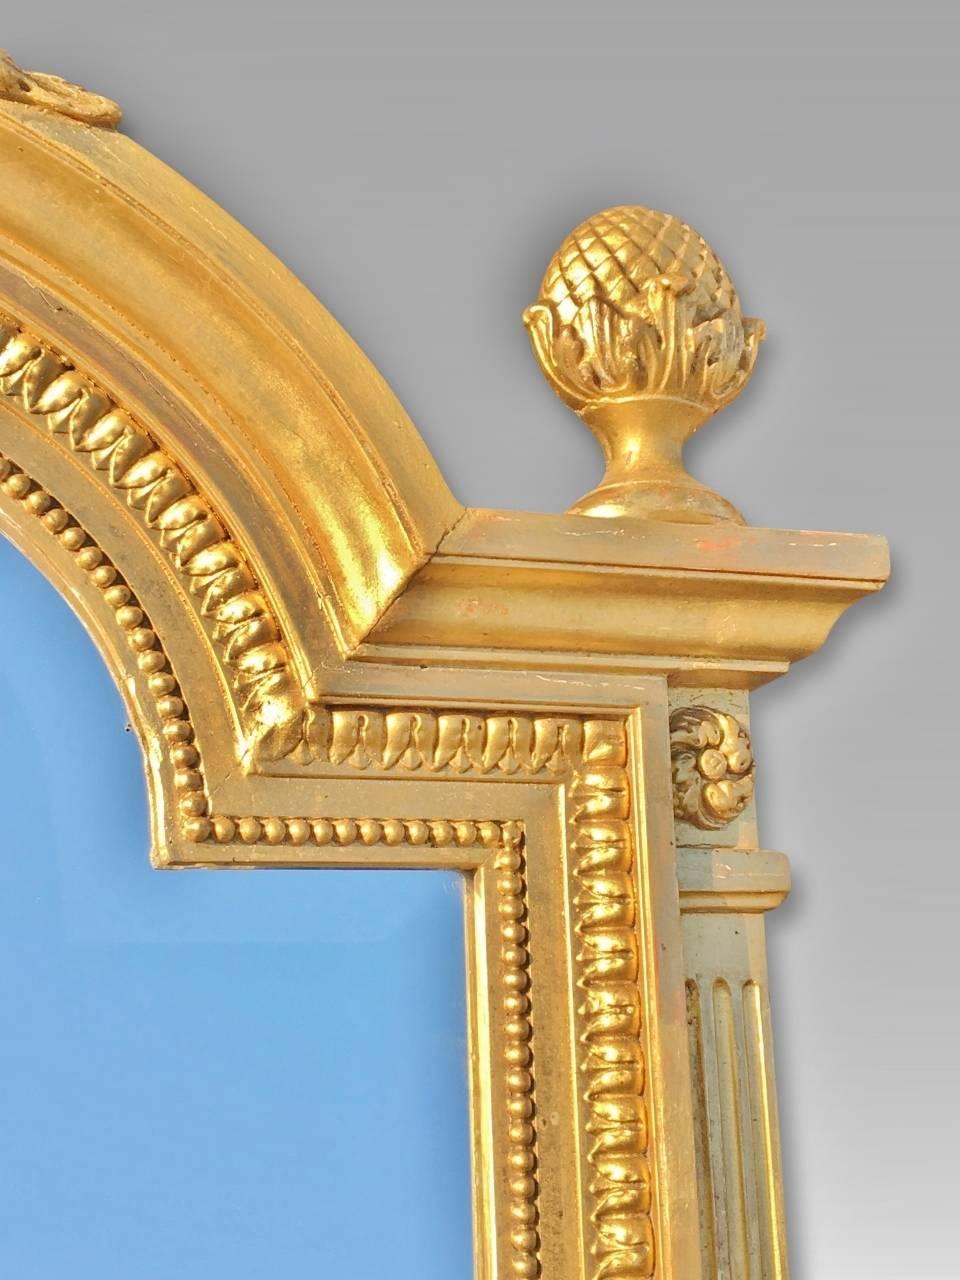 French Provincial 19th Century Gilded Wall Mirror / Overmantel, French, circa 1890